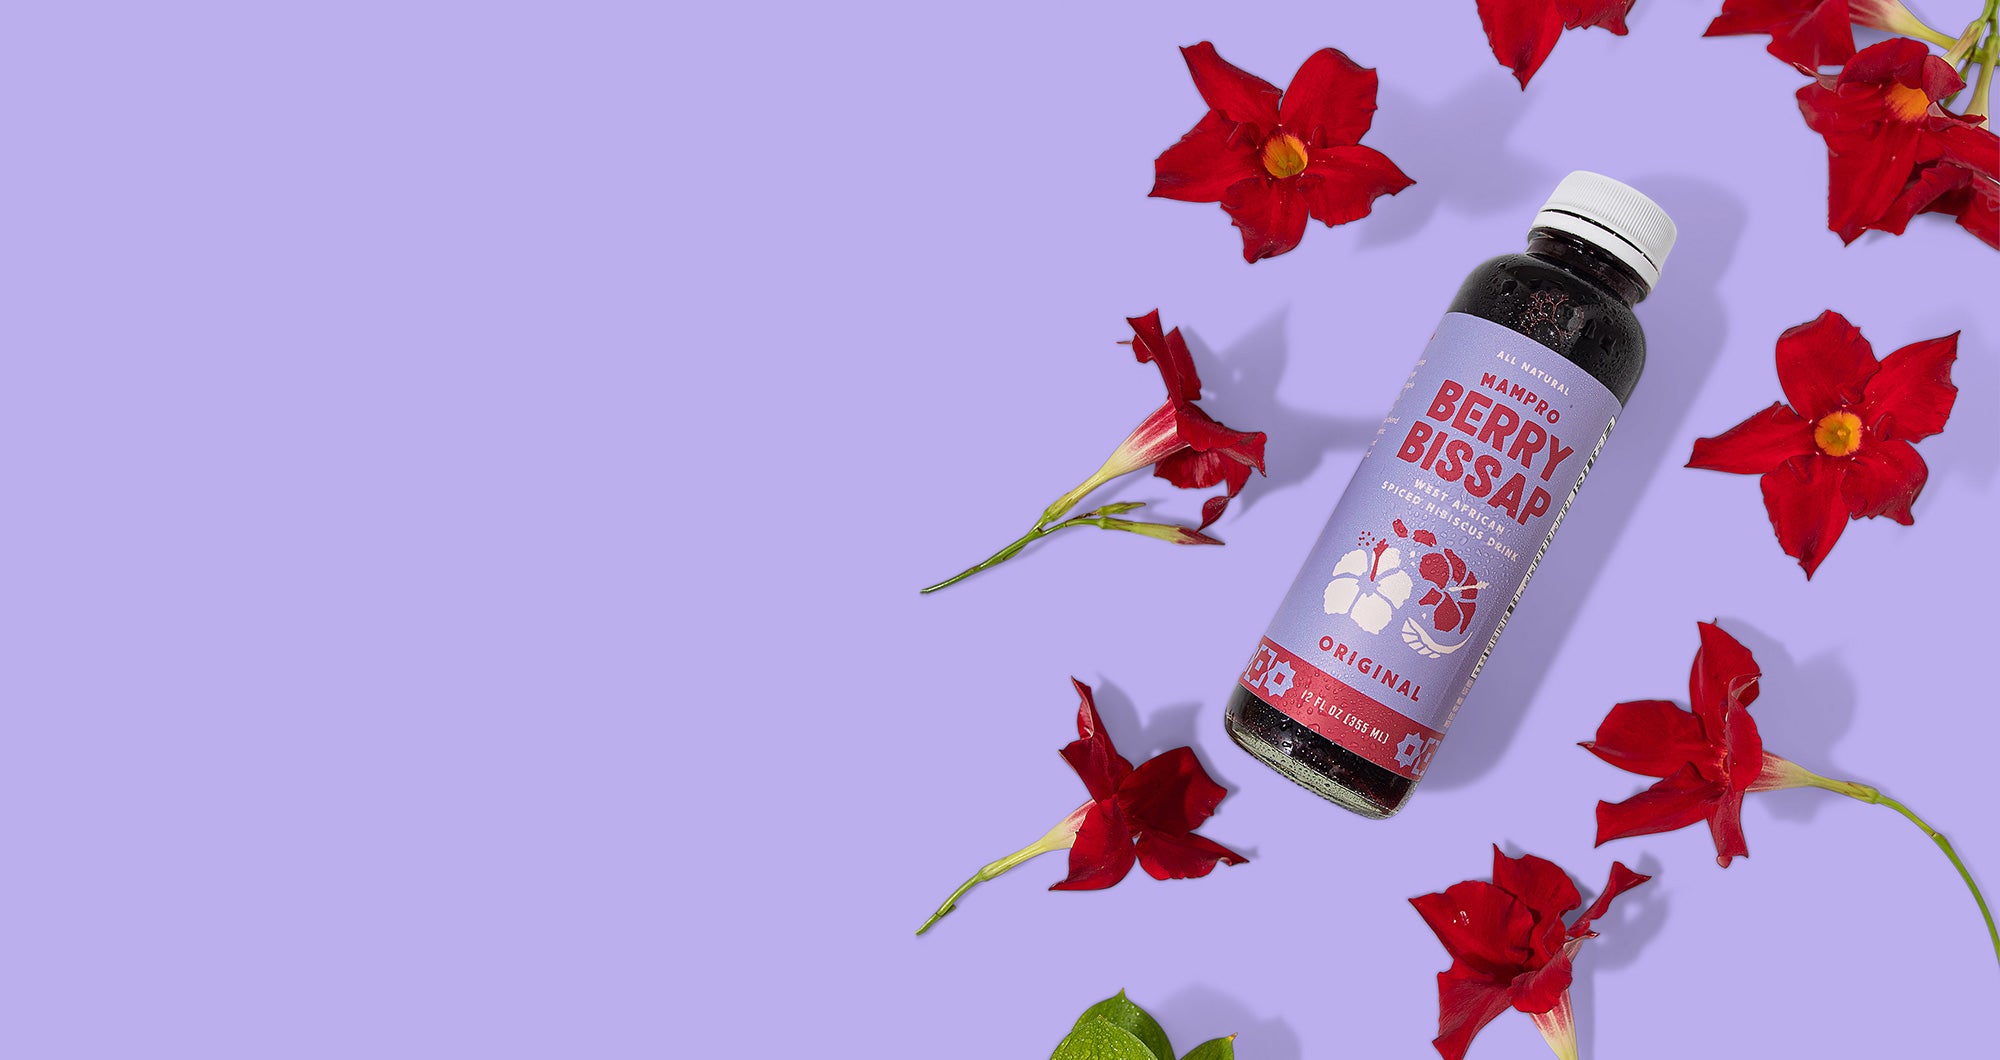 Bottle of Original Berry Bissap on purple background with scattered hibiscus flowers